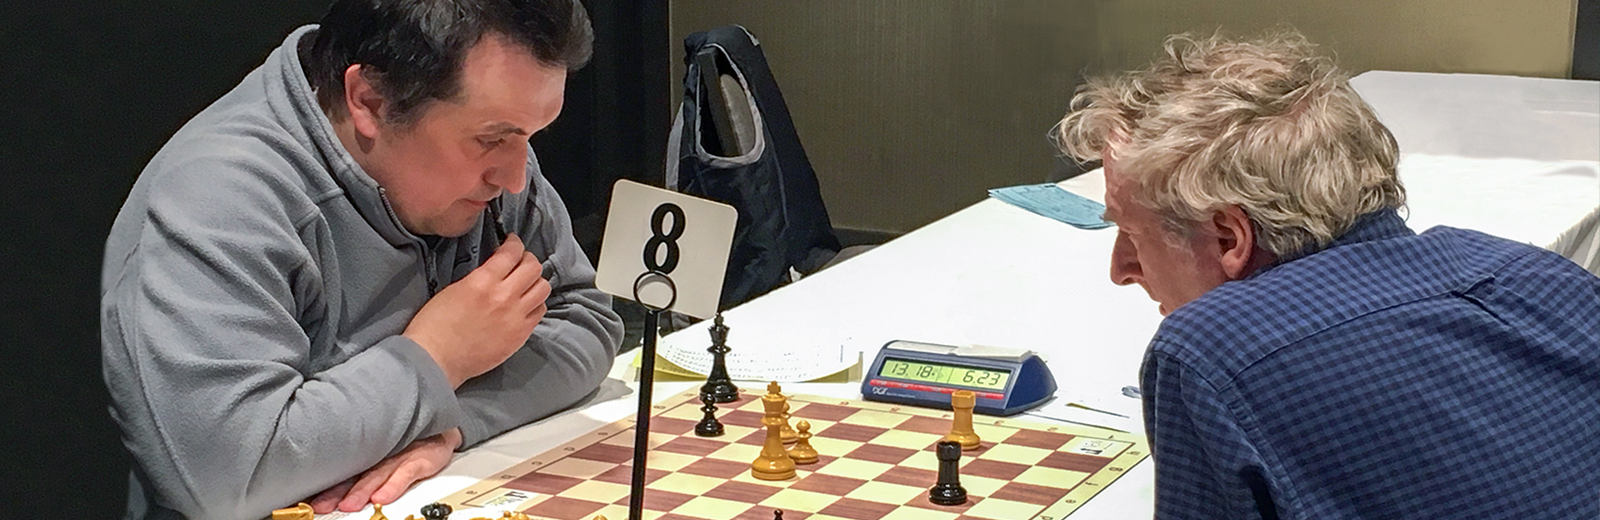 Highlights from the 2019 U.S. Amateur Team East Chess Tournament